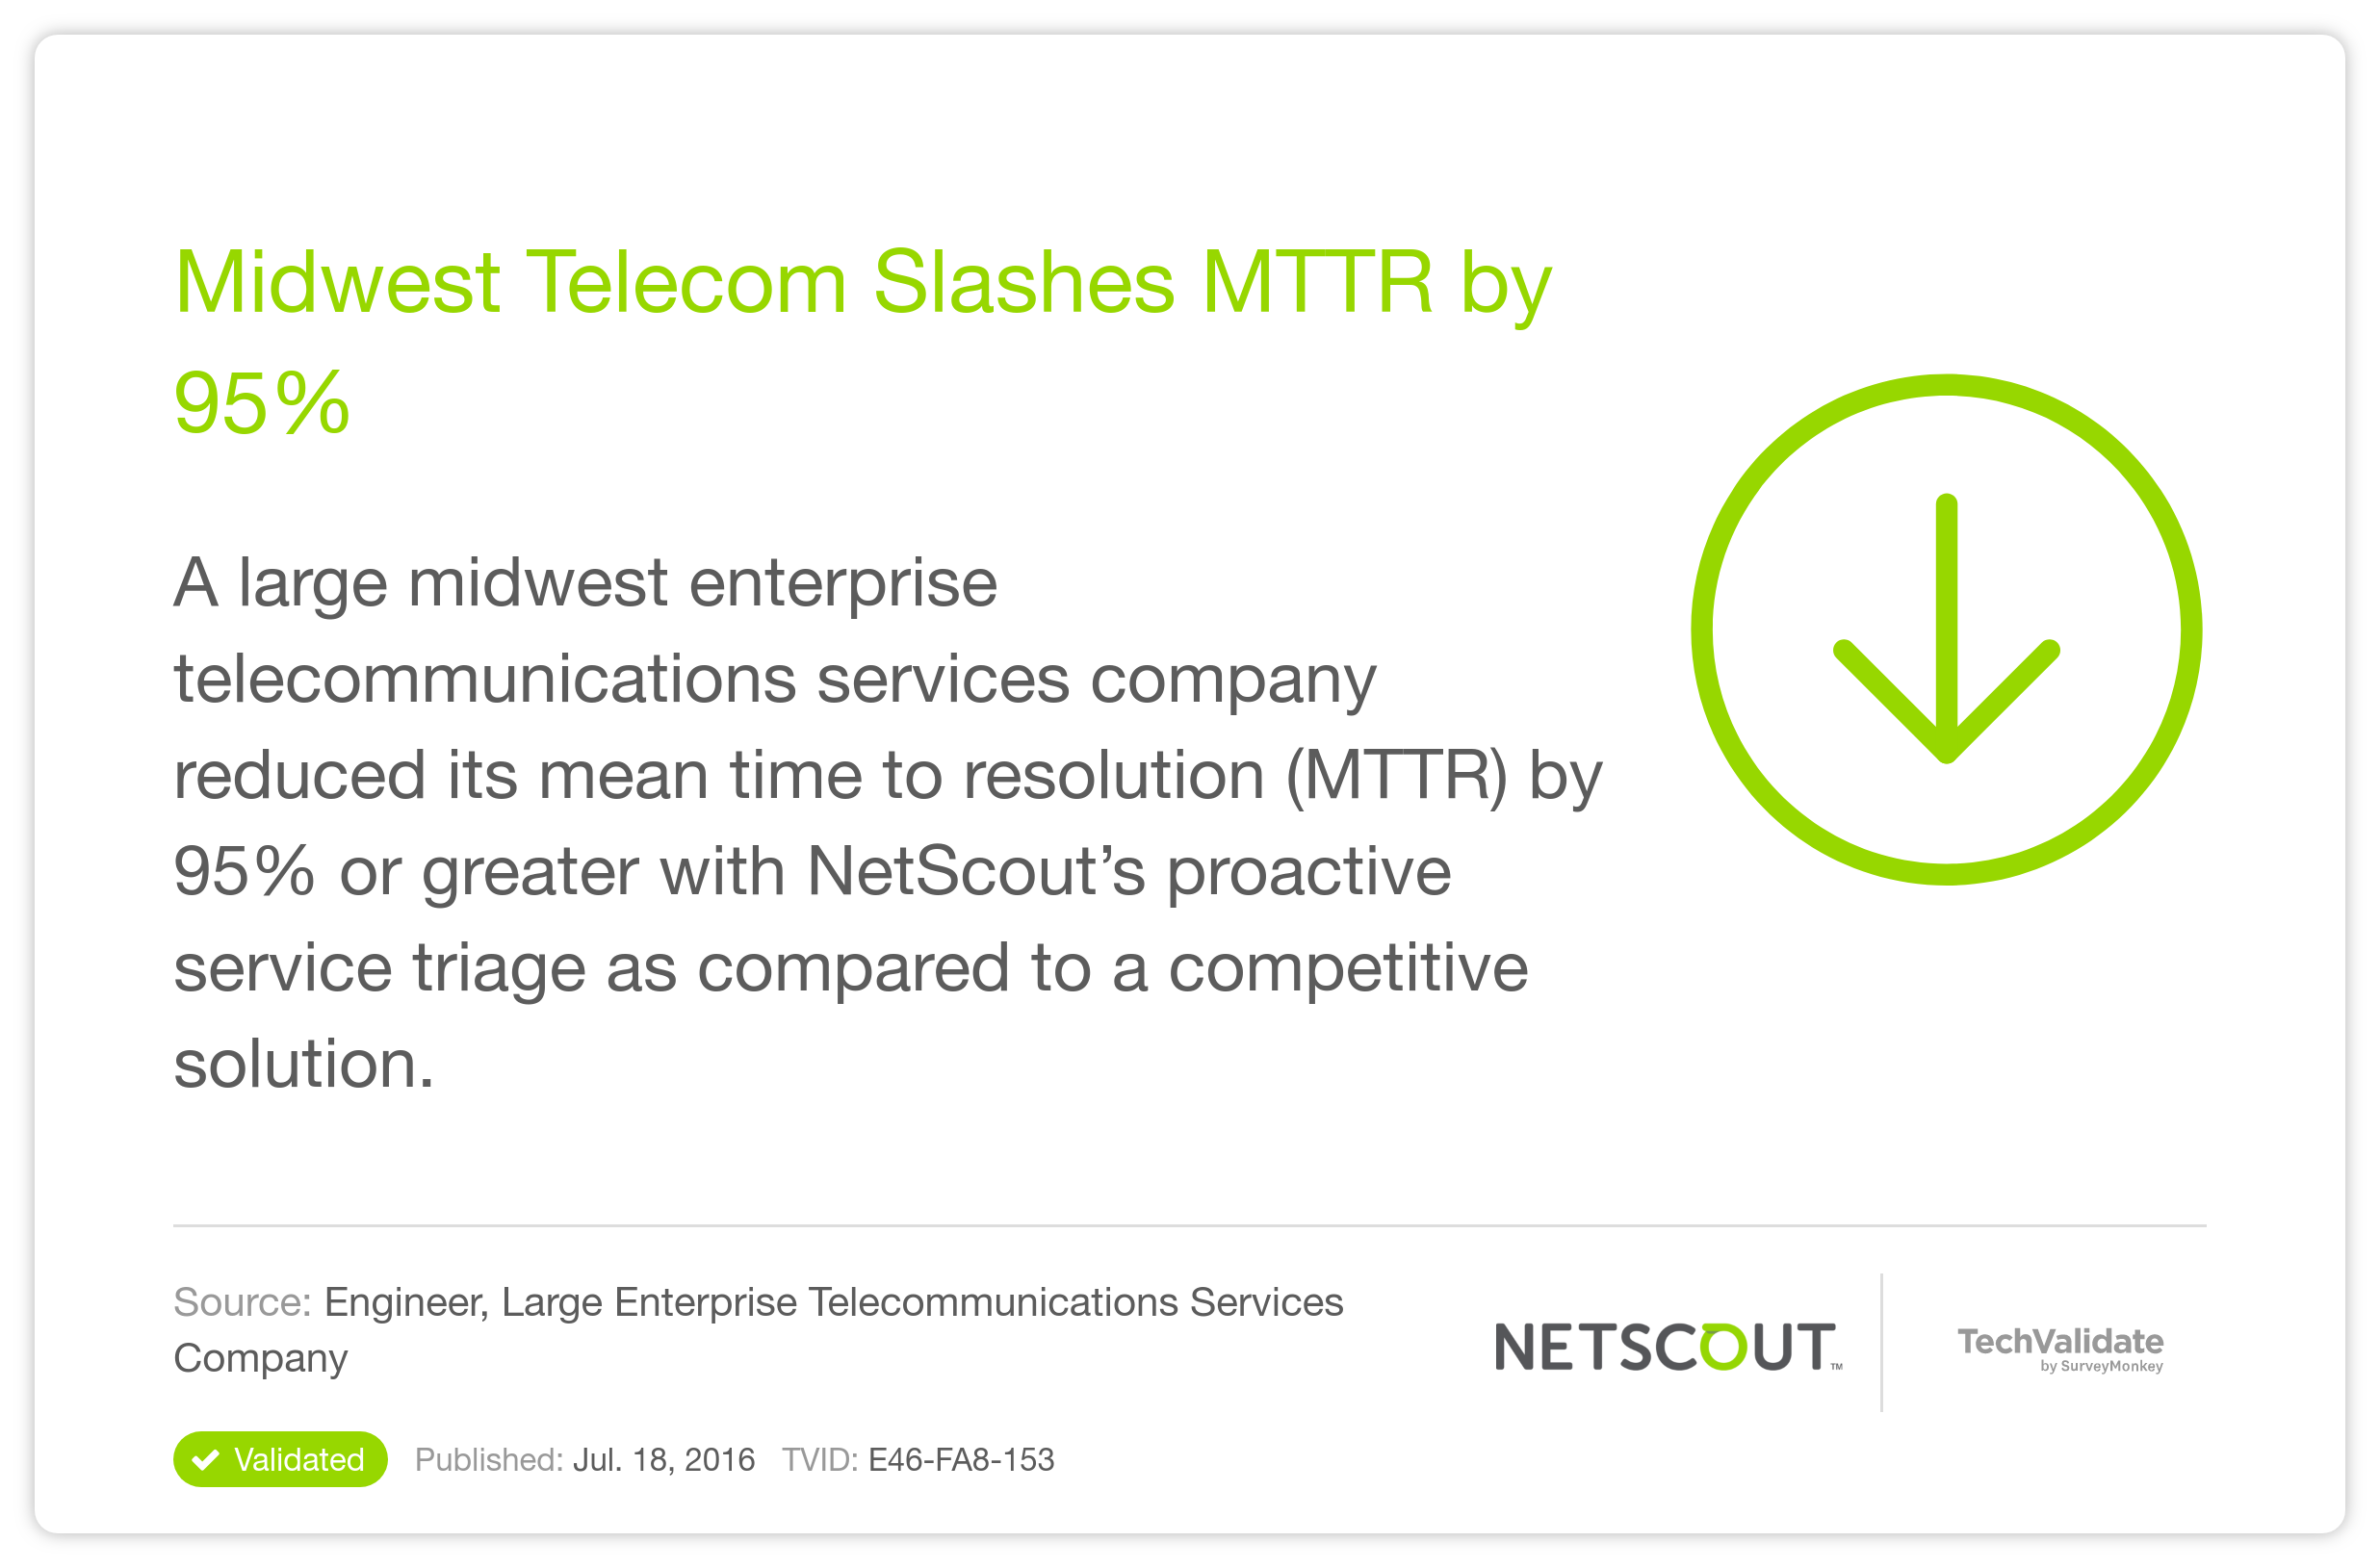 Midwest Telecom Slashes MTTR by 95%